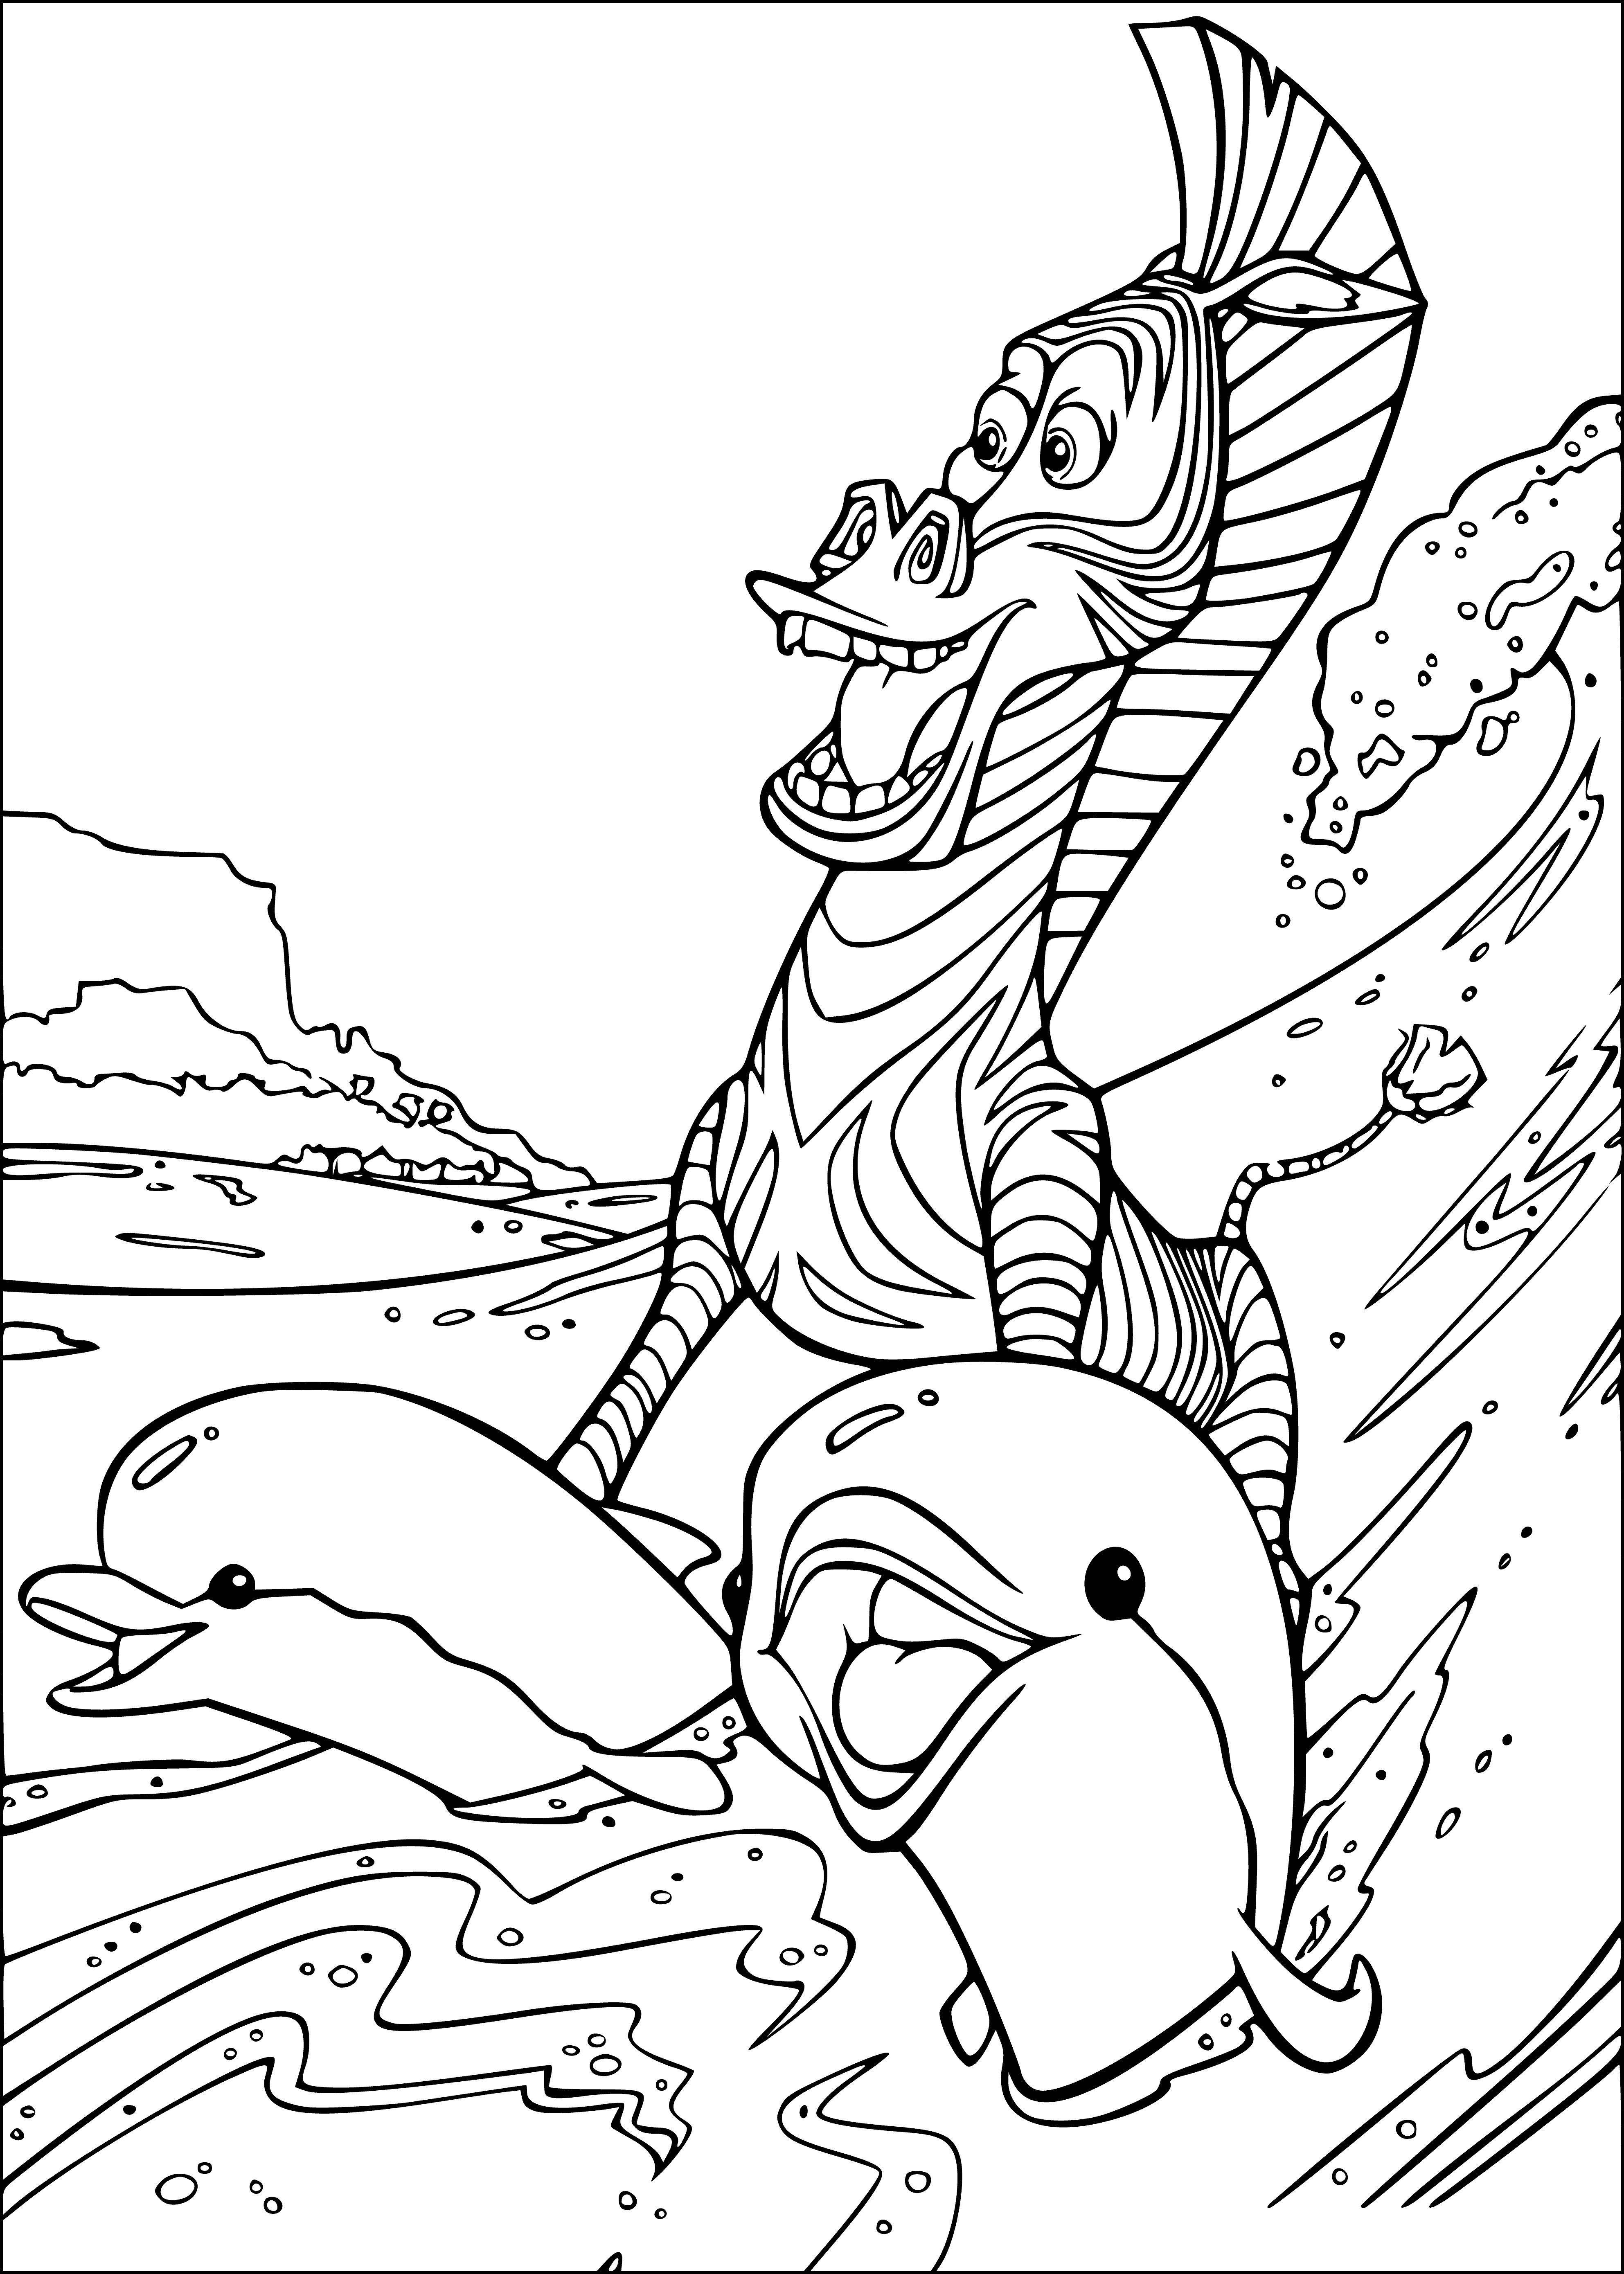 coloring page: A zebra and dolphin frolic in the painting, "Madagascar - Marty and the Dolphins". Blue and white stripes bring color to the wave.